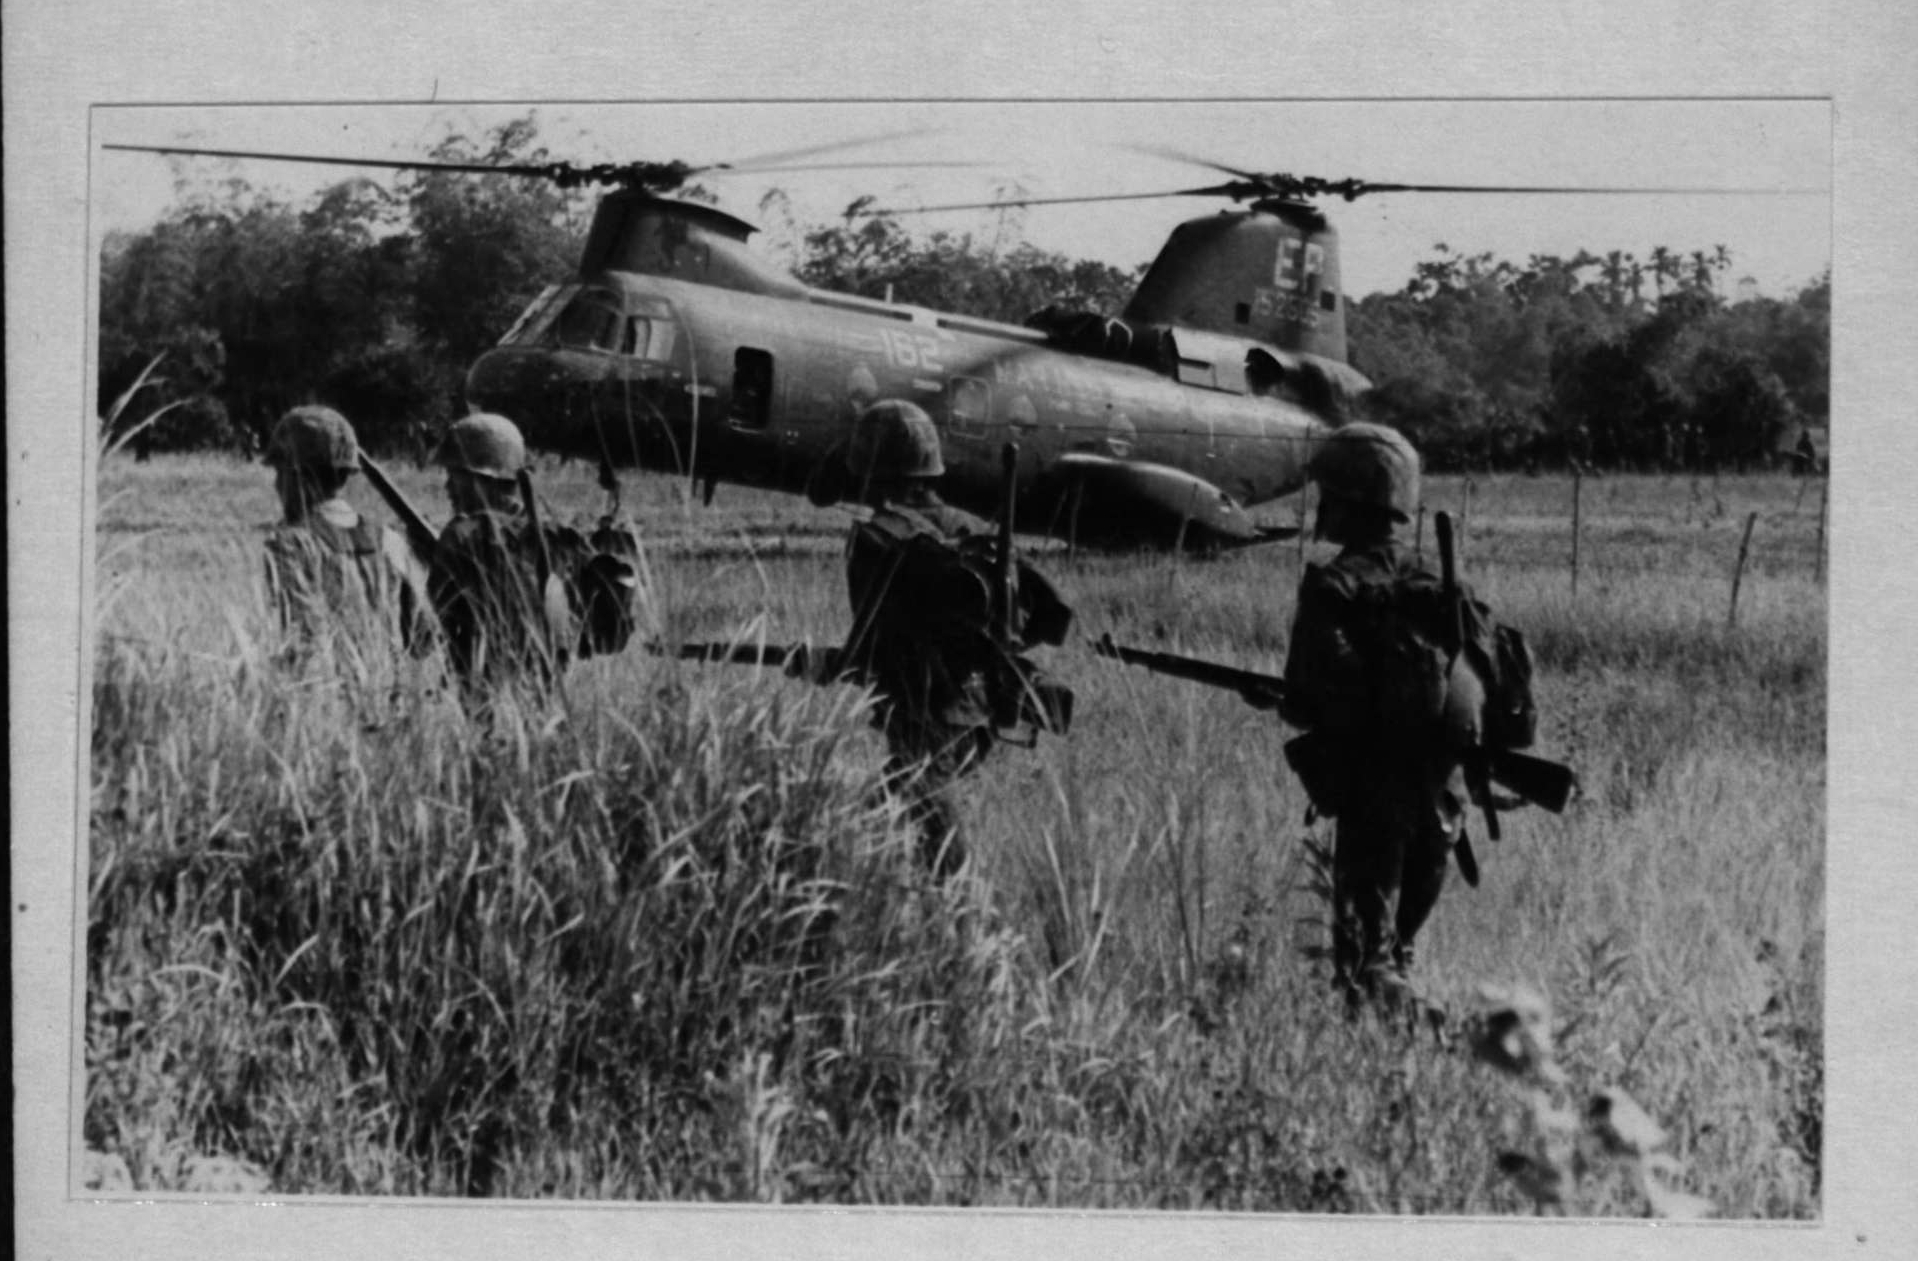 South Vietnamese Marines Move Out of the Landing Zone